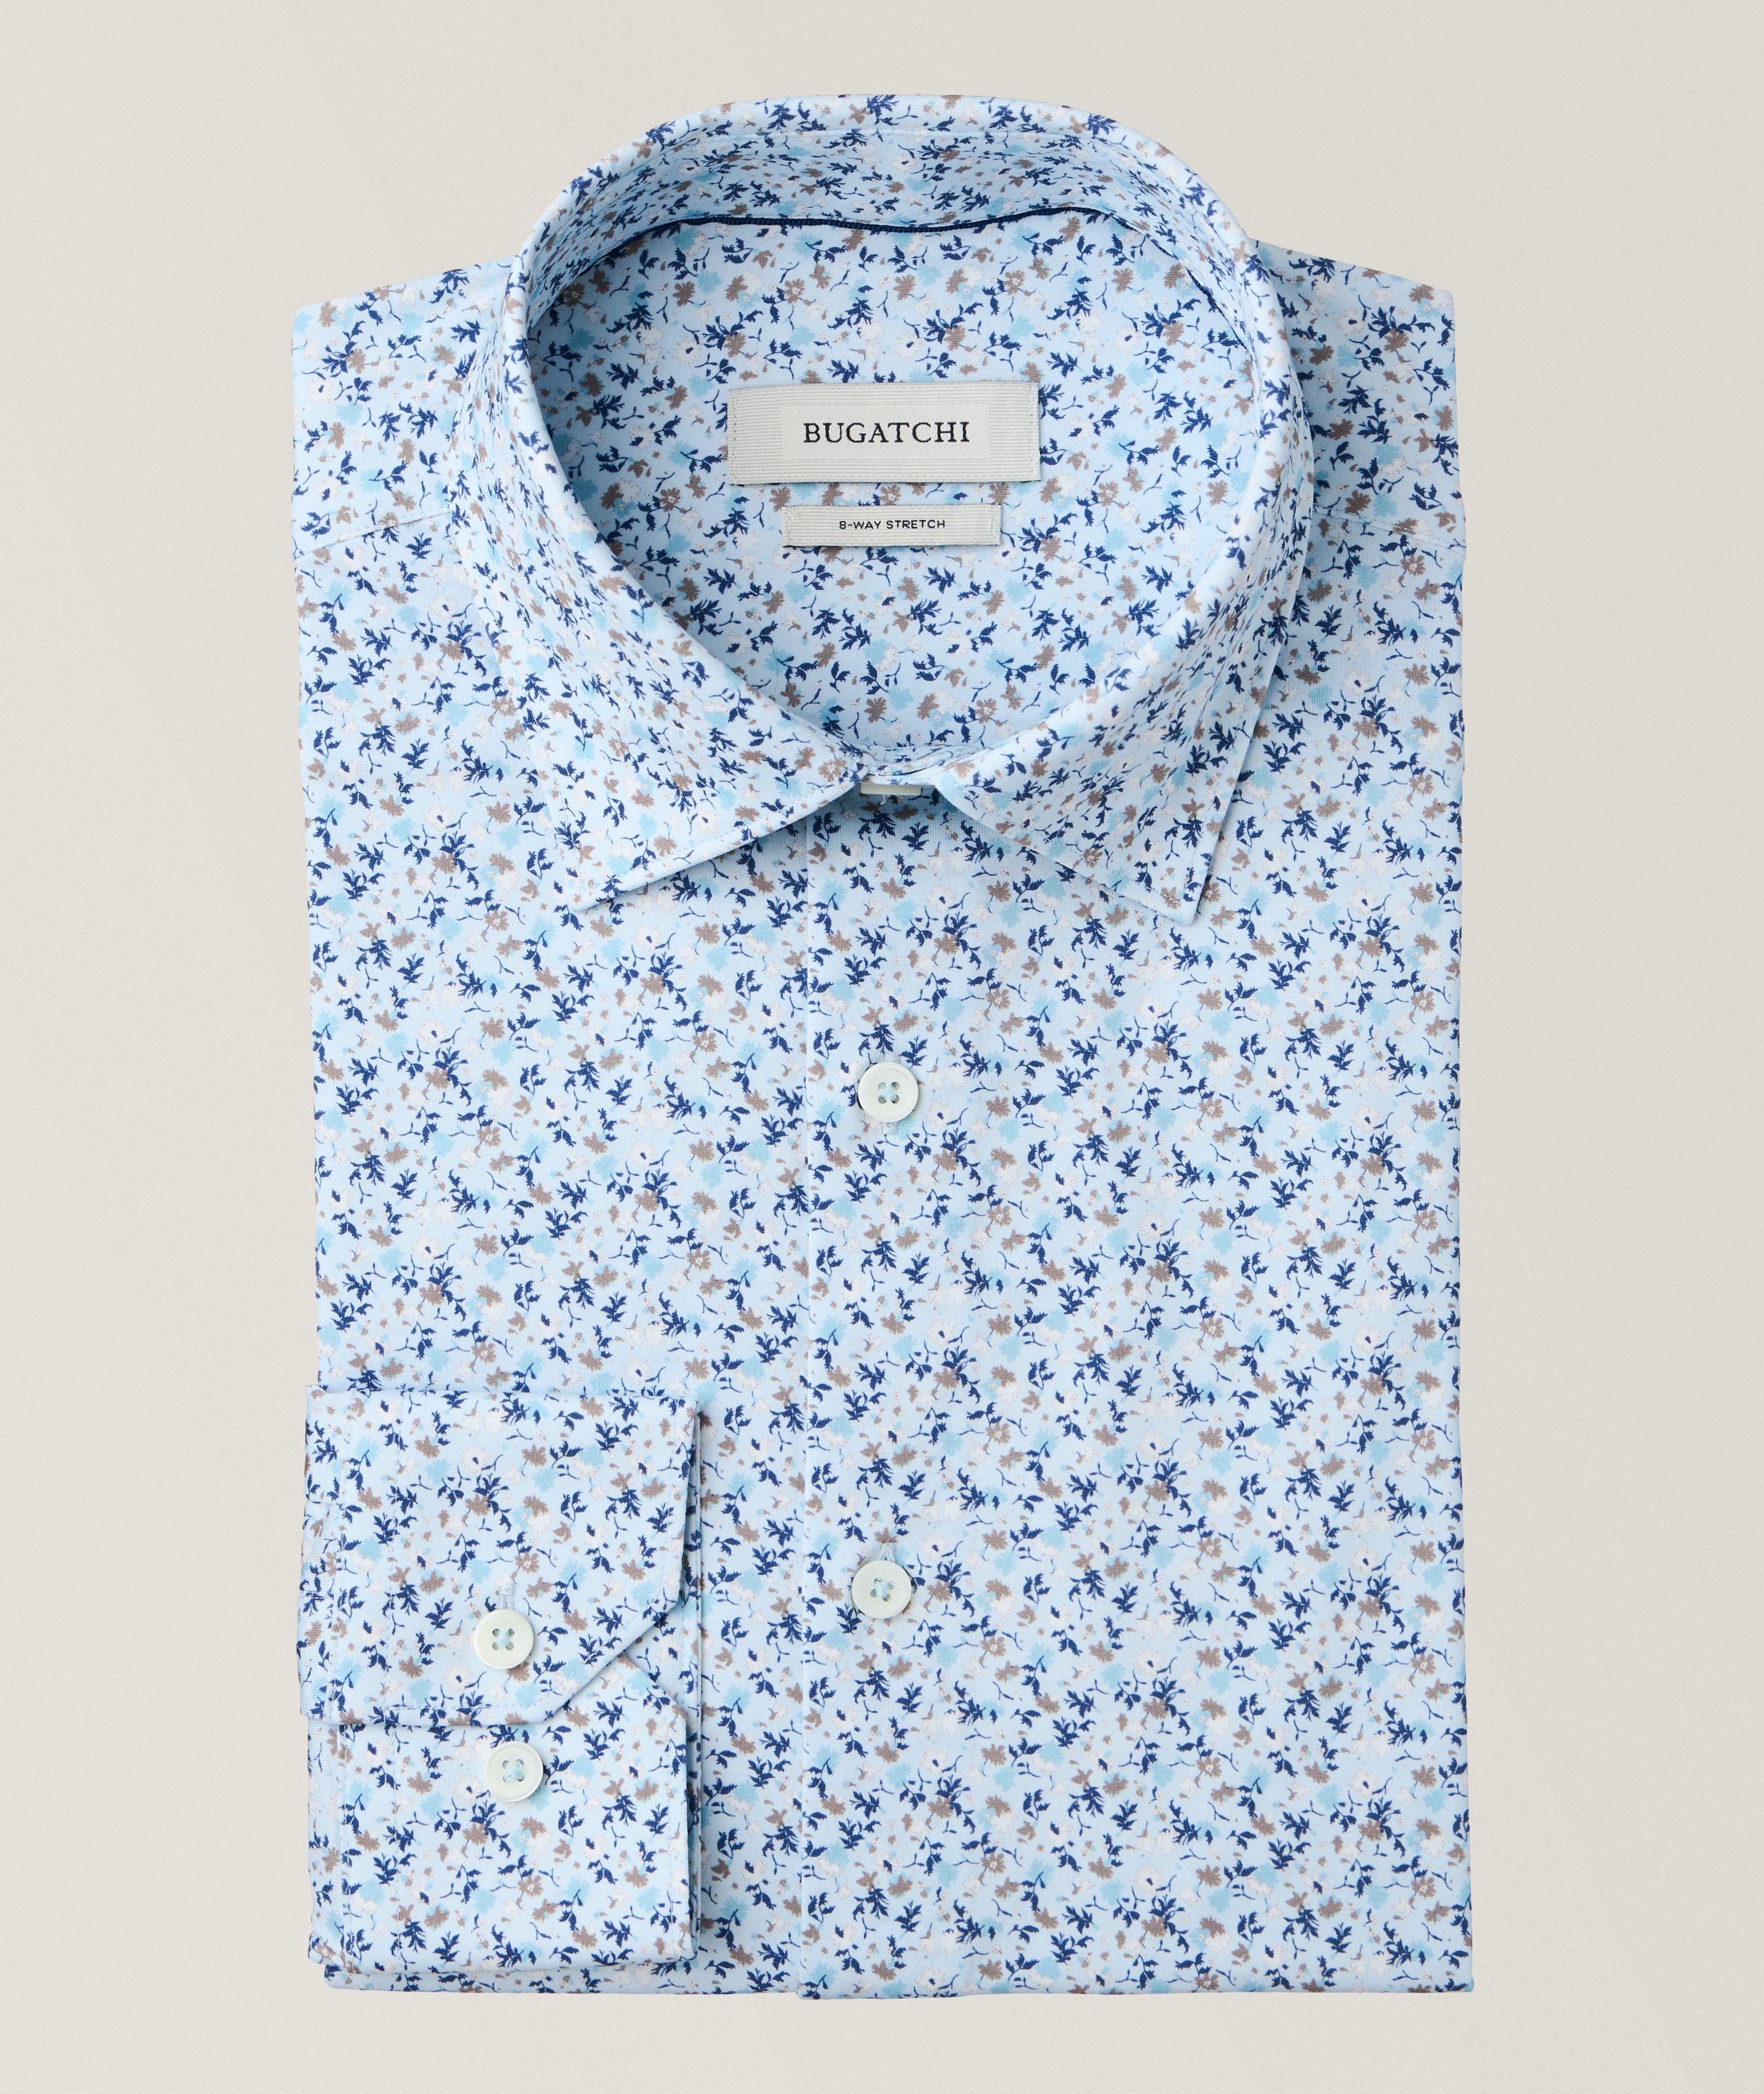 Micro Floral OoohCotton Sport Shirt image 0